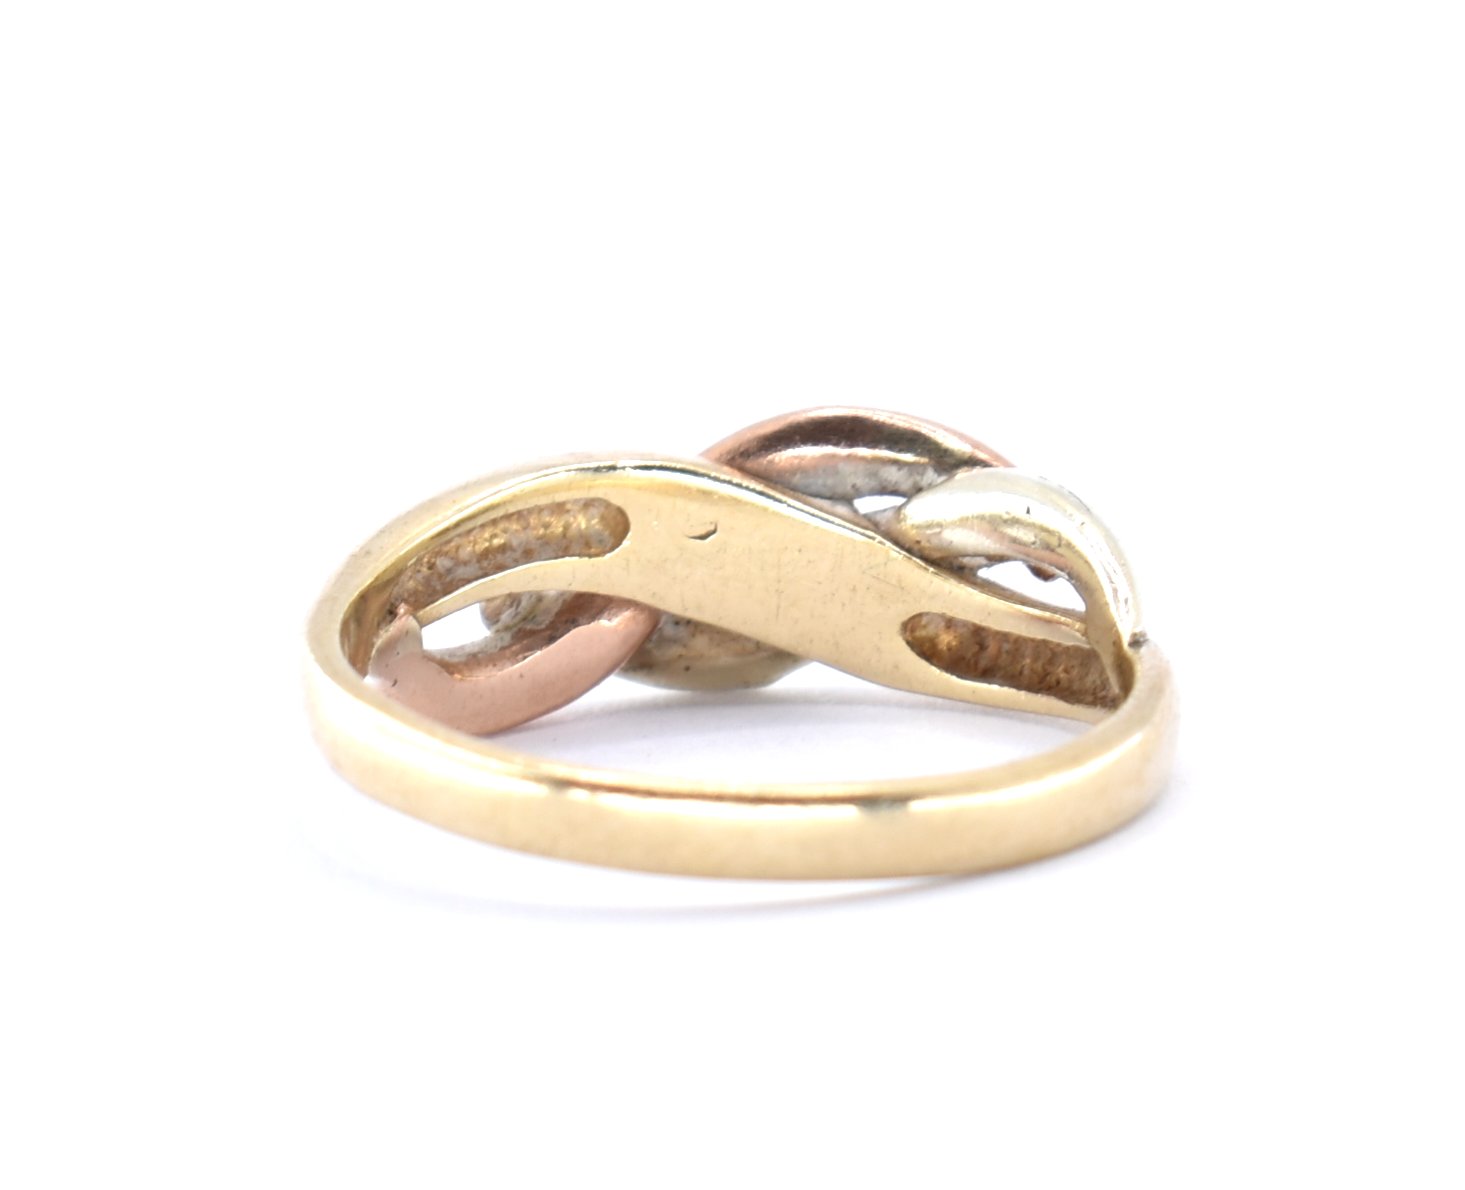 9CT TRI GOLD AND DIAMOND RING - Image 3 of 6